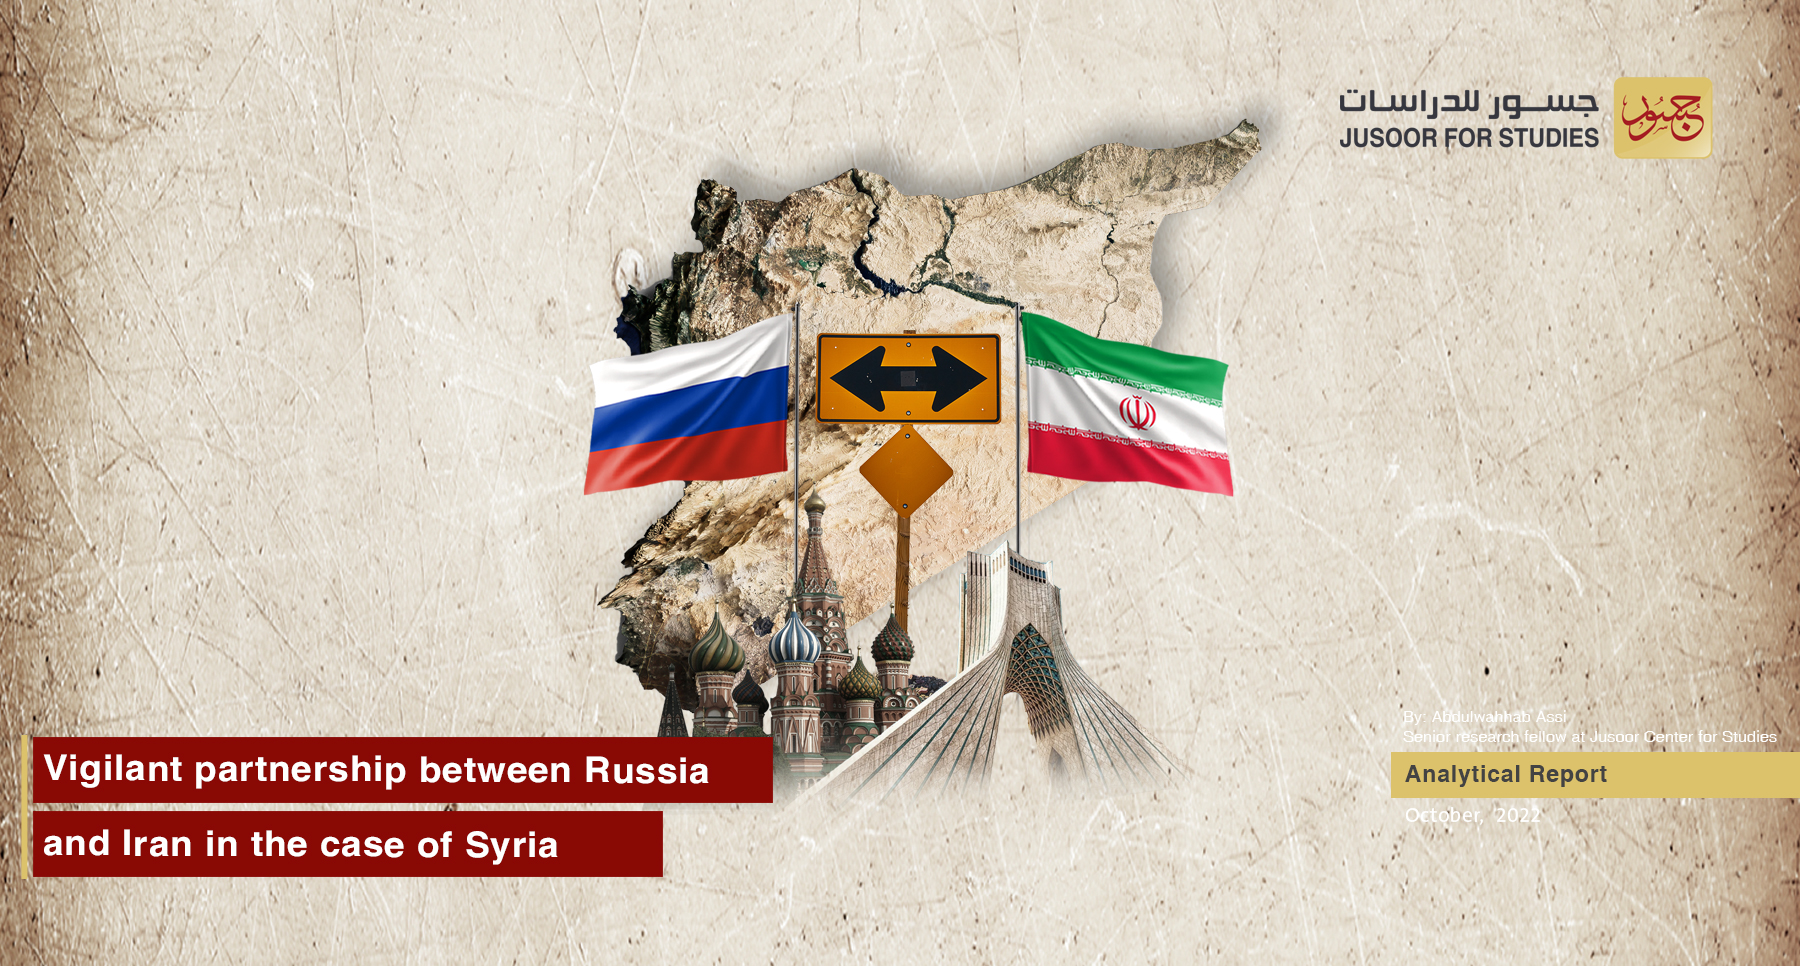 Vigilant partnership between Russia and Iran in the case of Syria